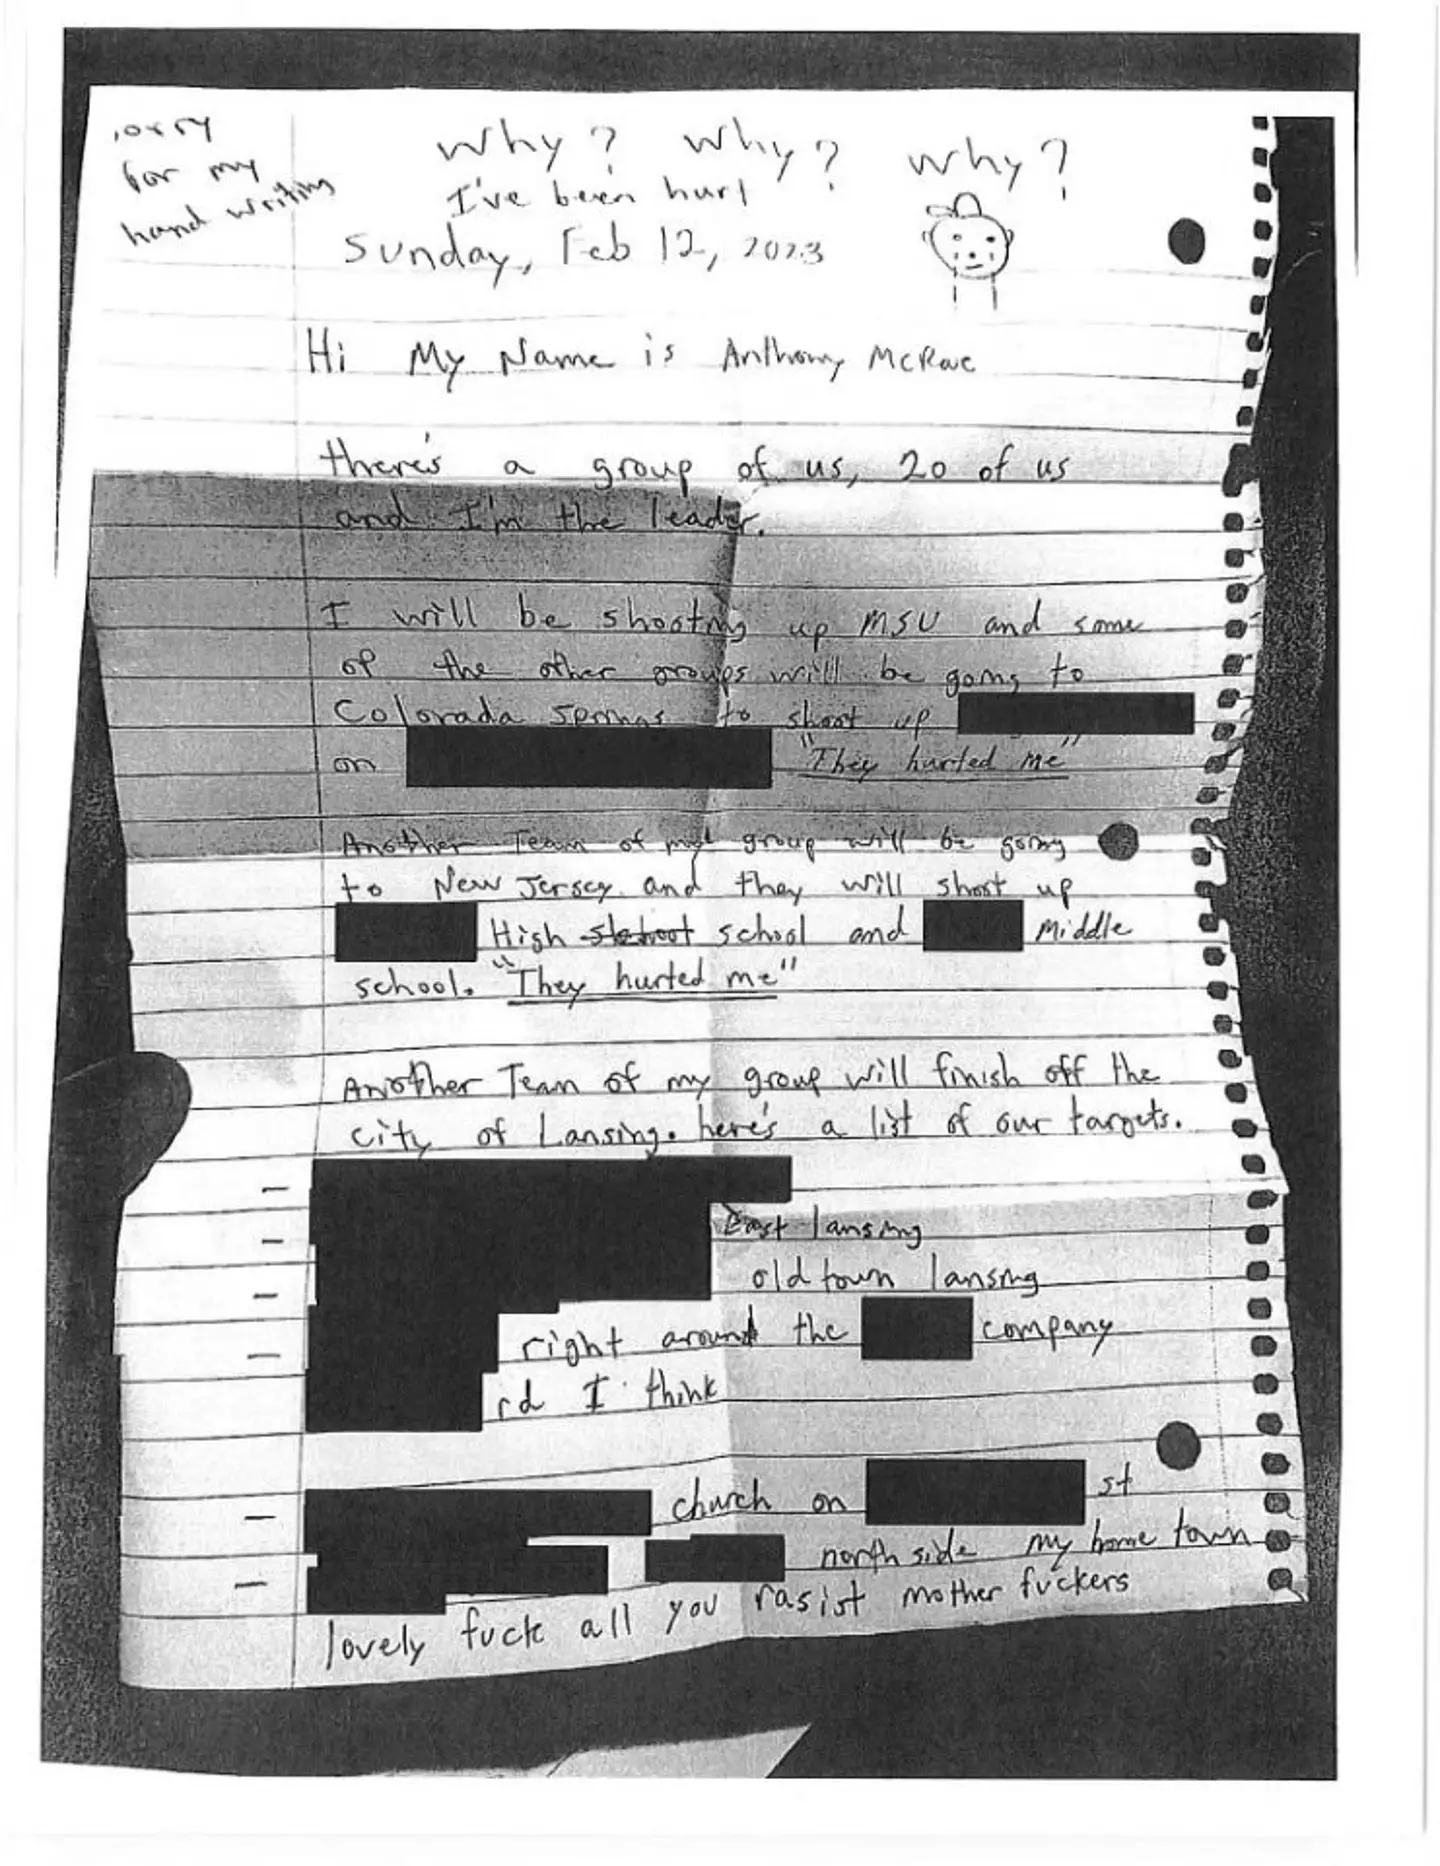 The disturbing letter was shared by police.